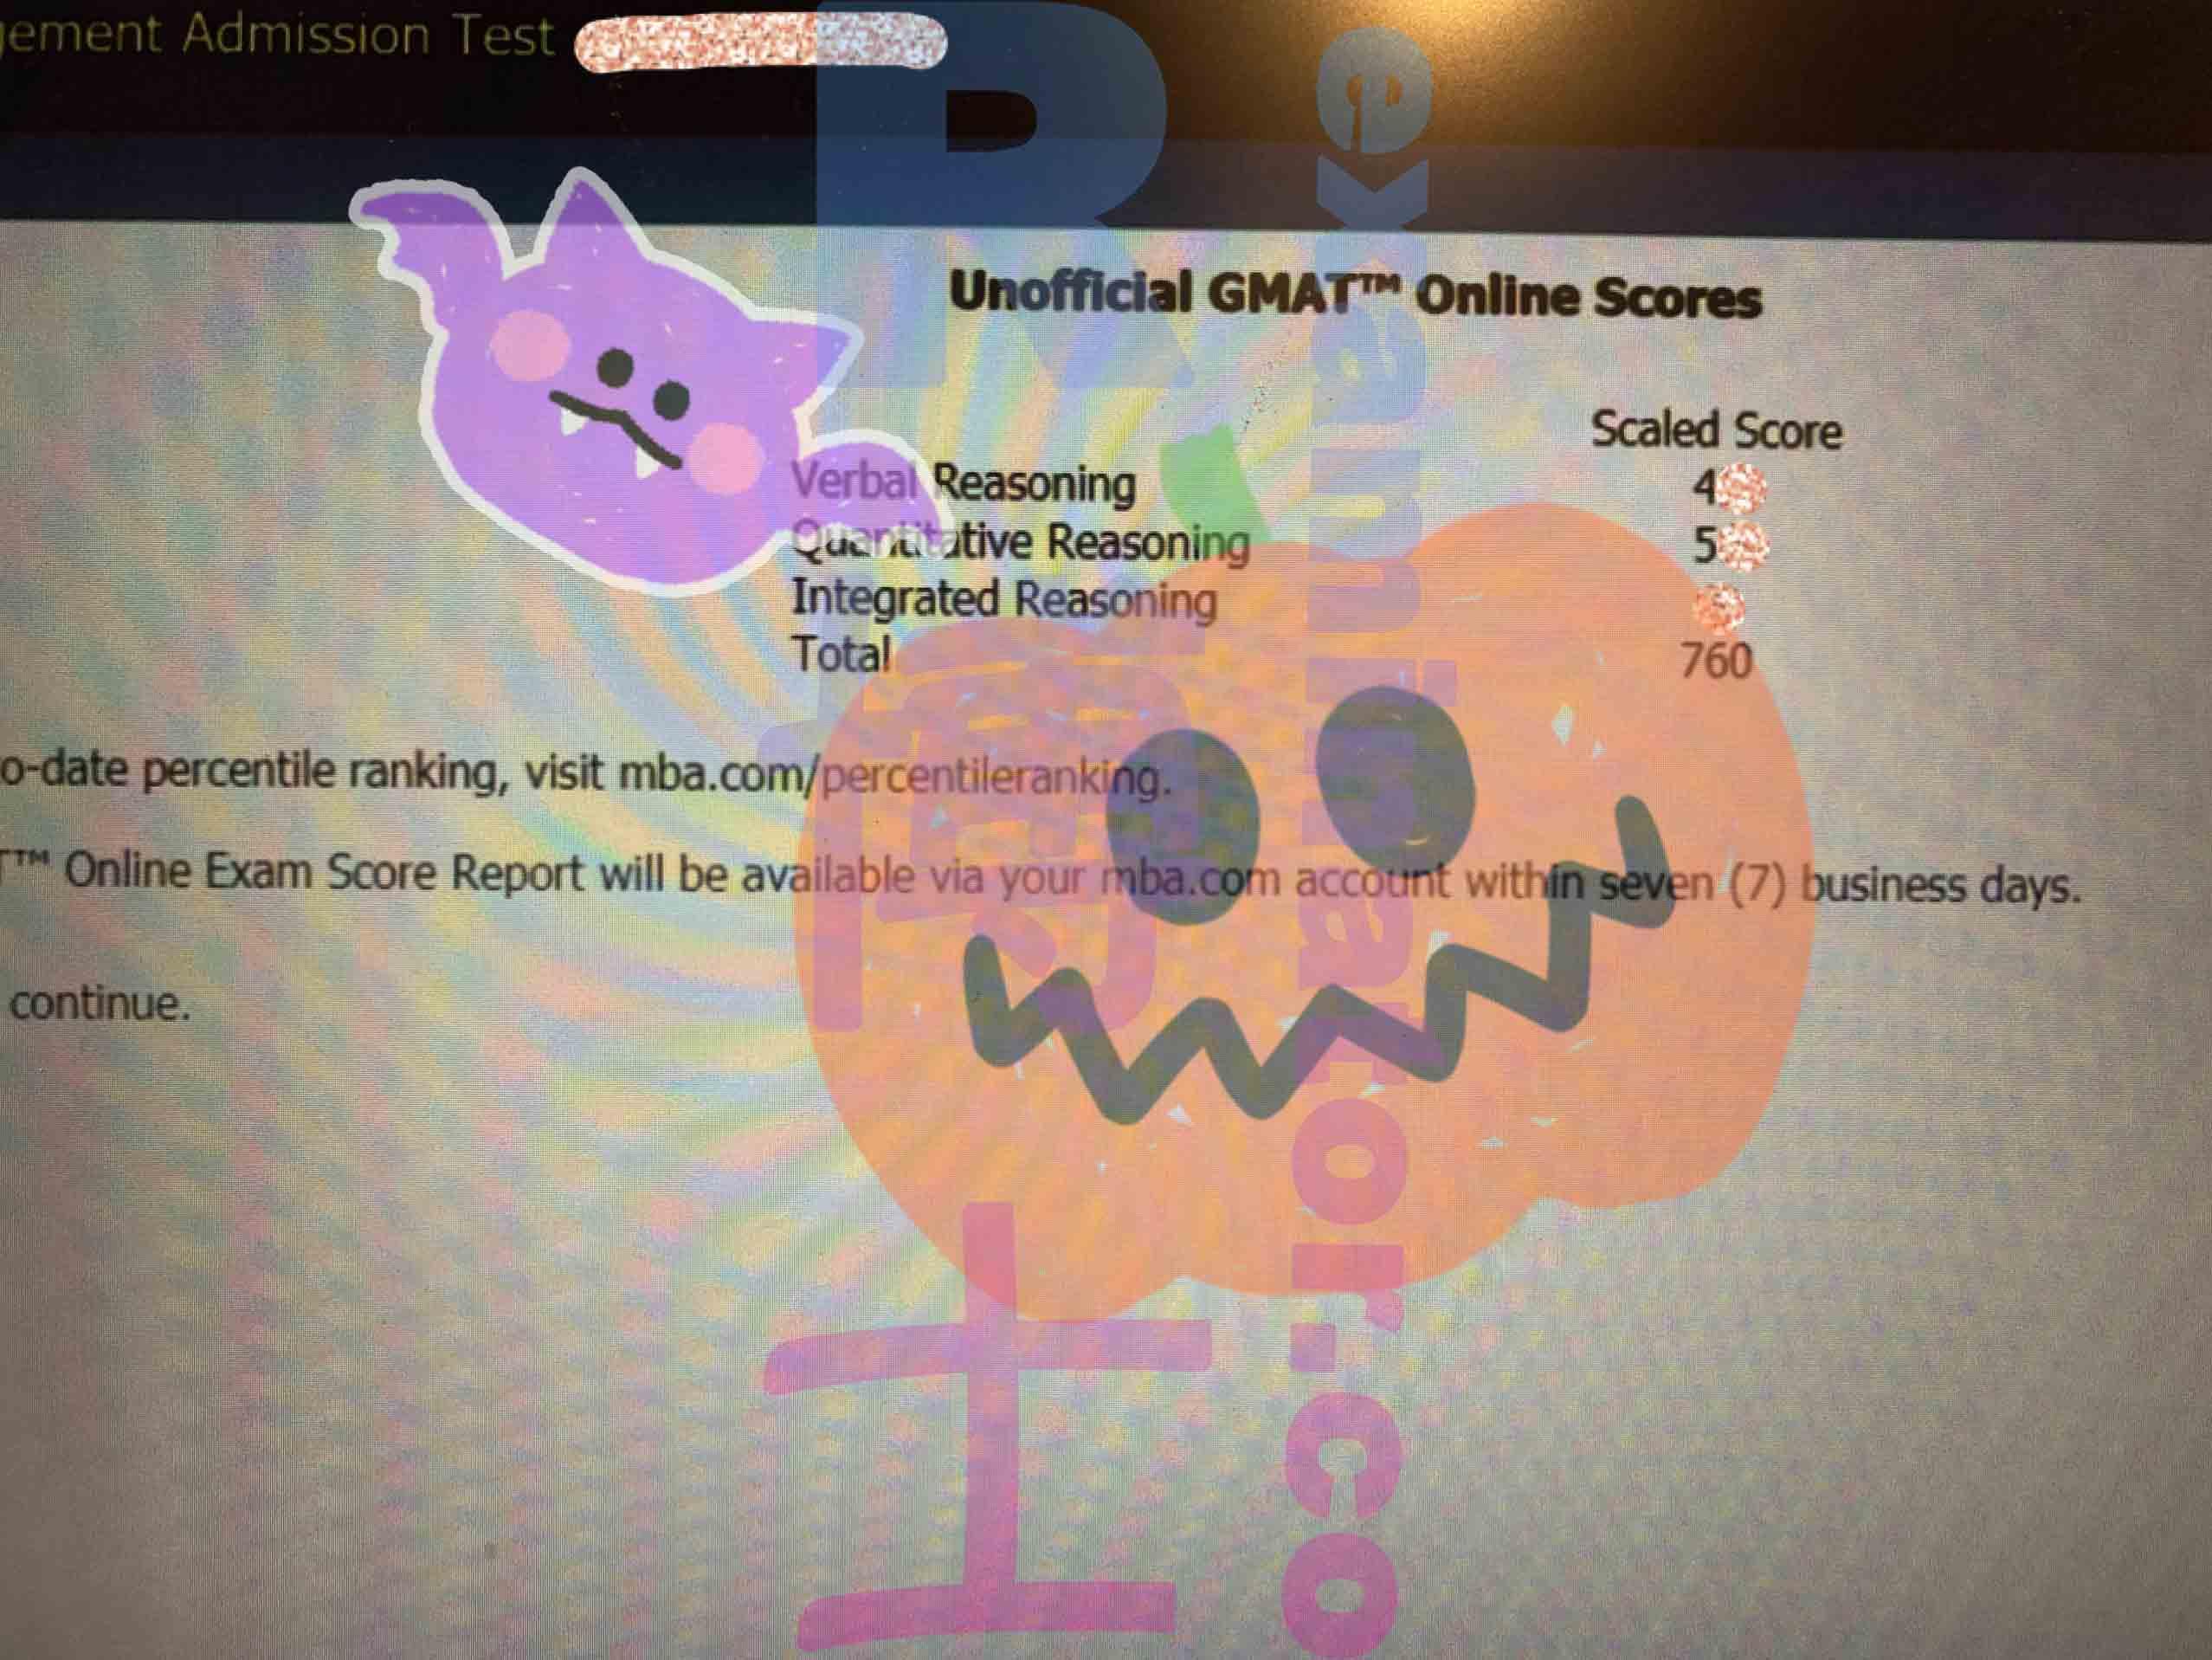 score image for GMAT Cheating success story #214